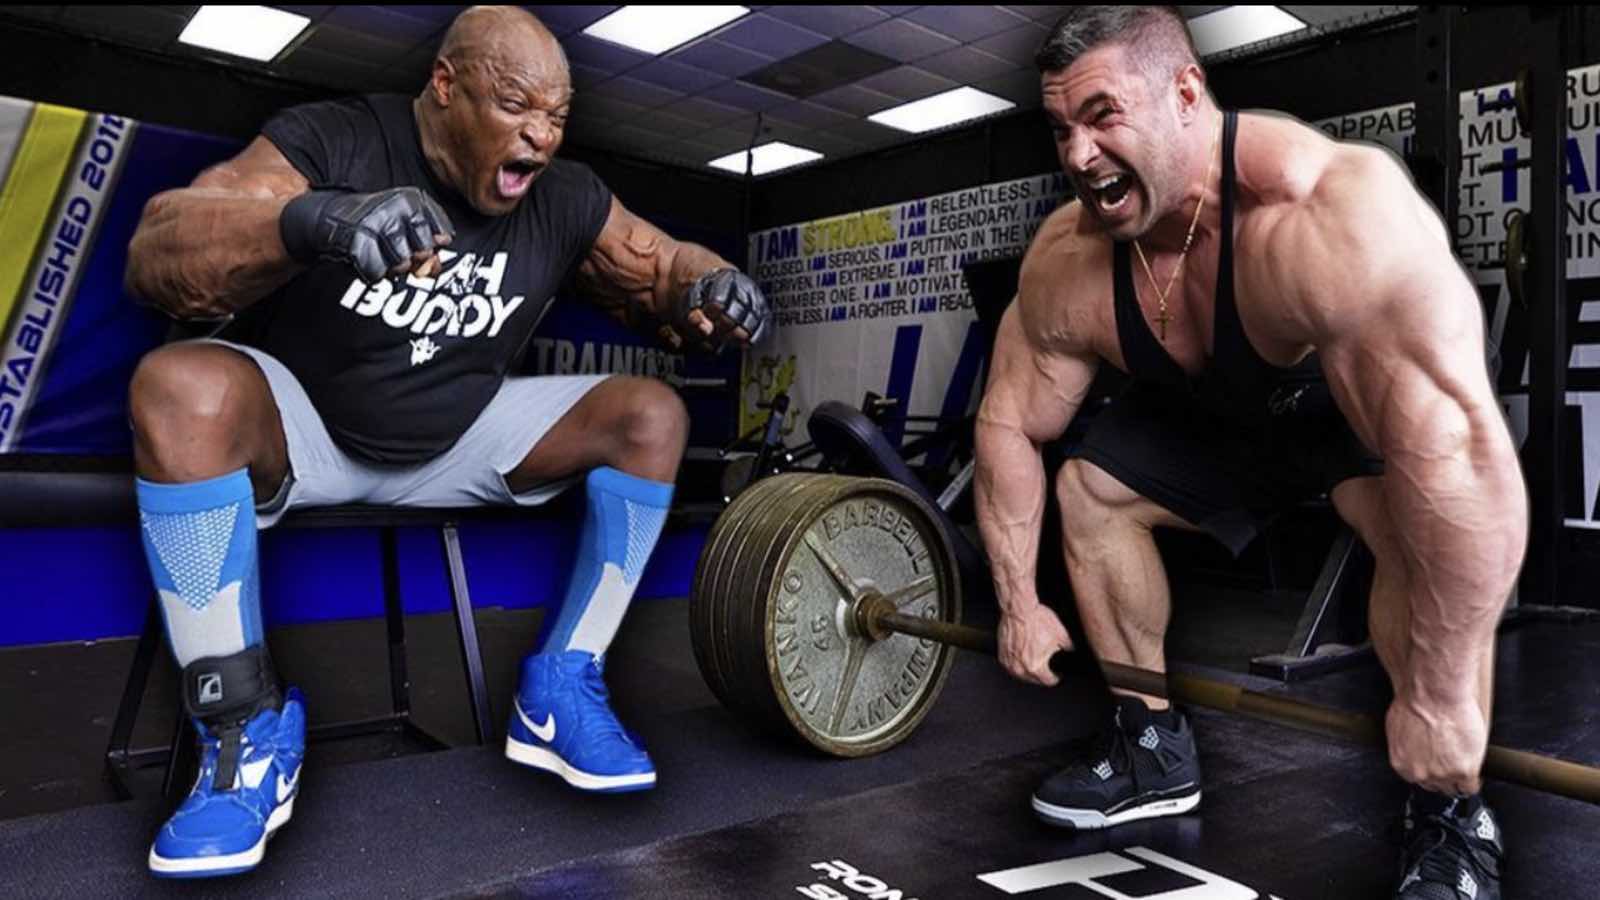 derek-lunsford-and-ronnie-coleman-spend-quality-time-building-up-their-back-and-biceps-–-breaking-muscle